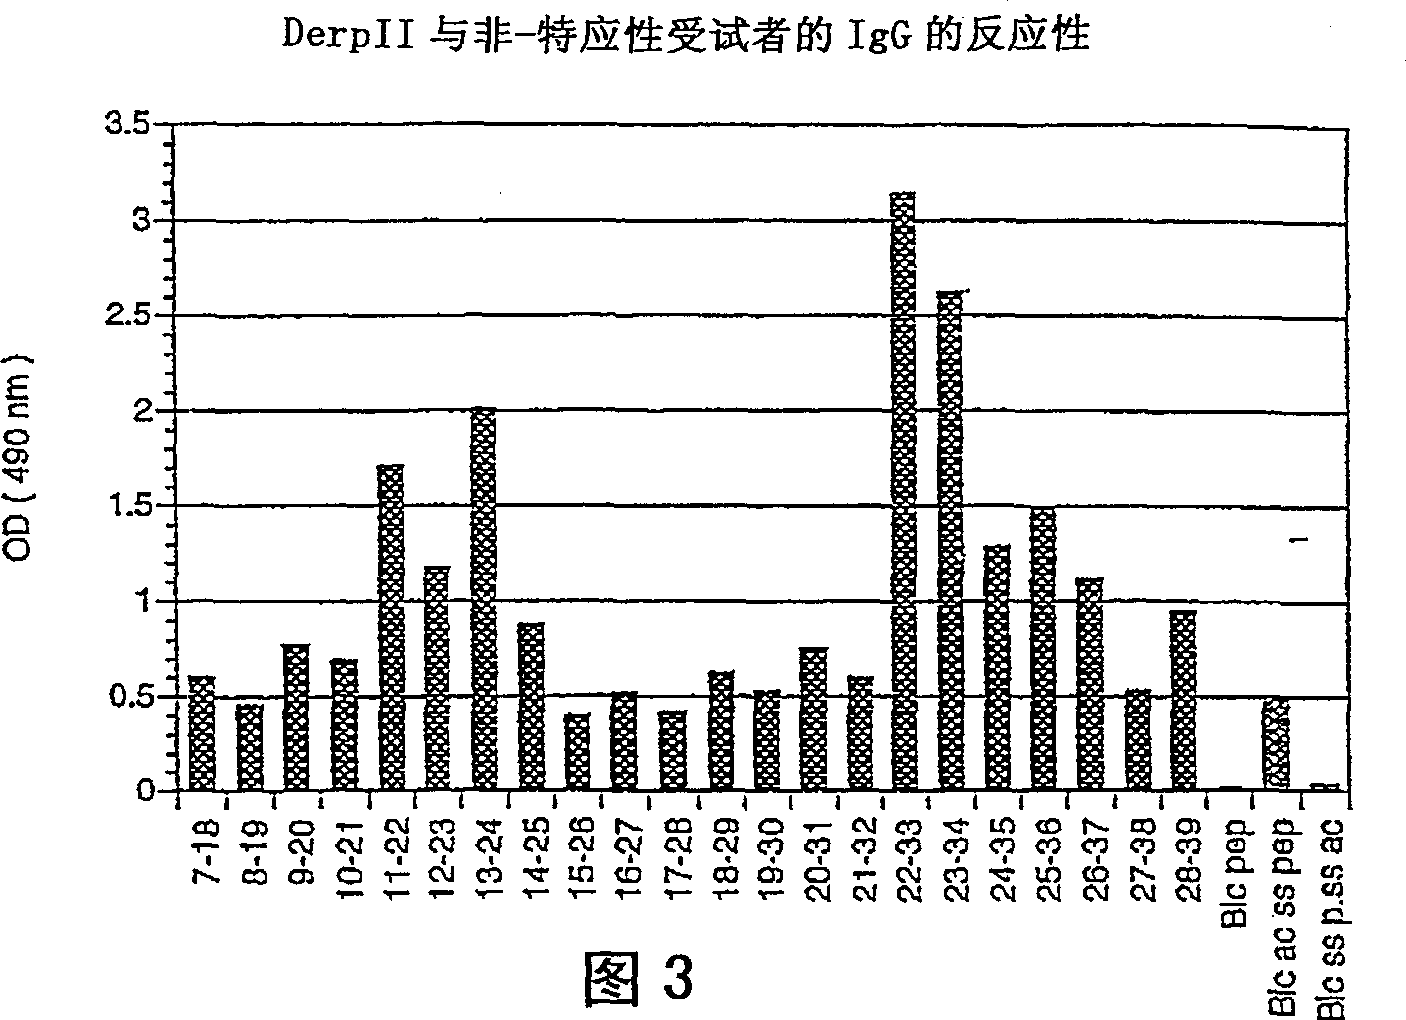 Compound and method for the prevention and/or the treatment of allergy